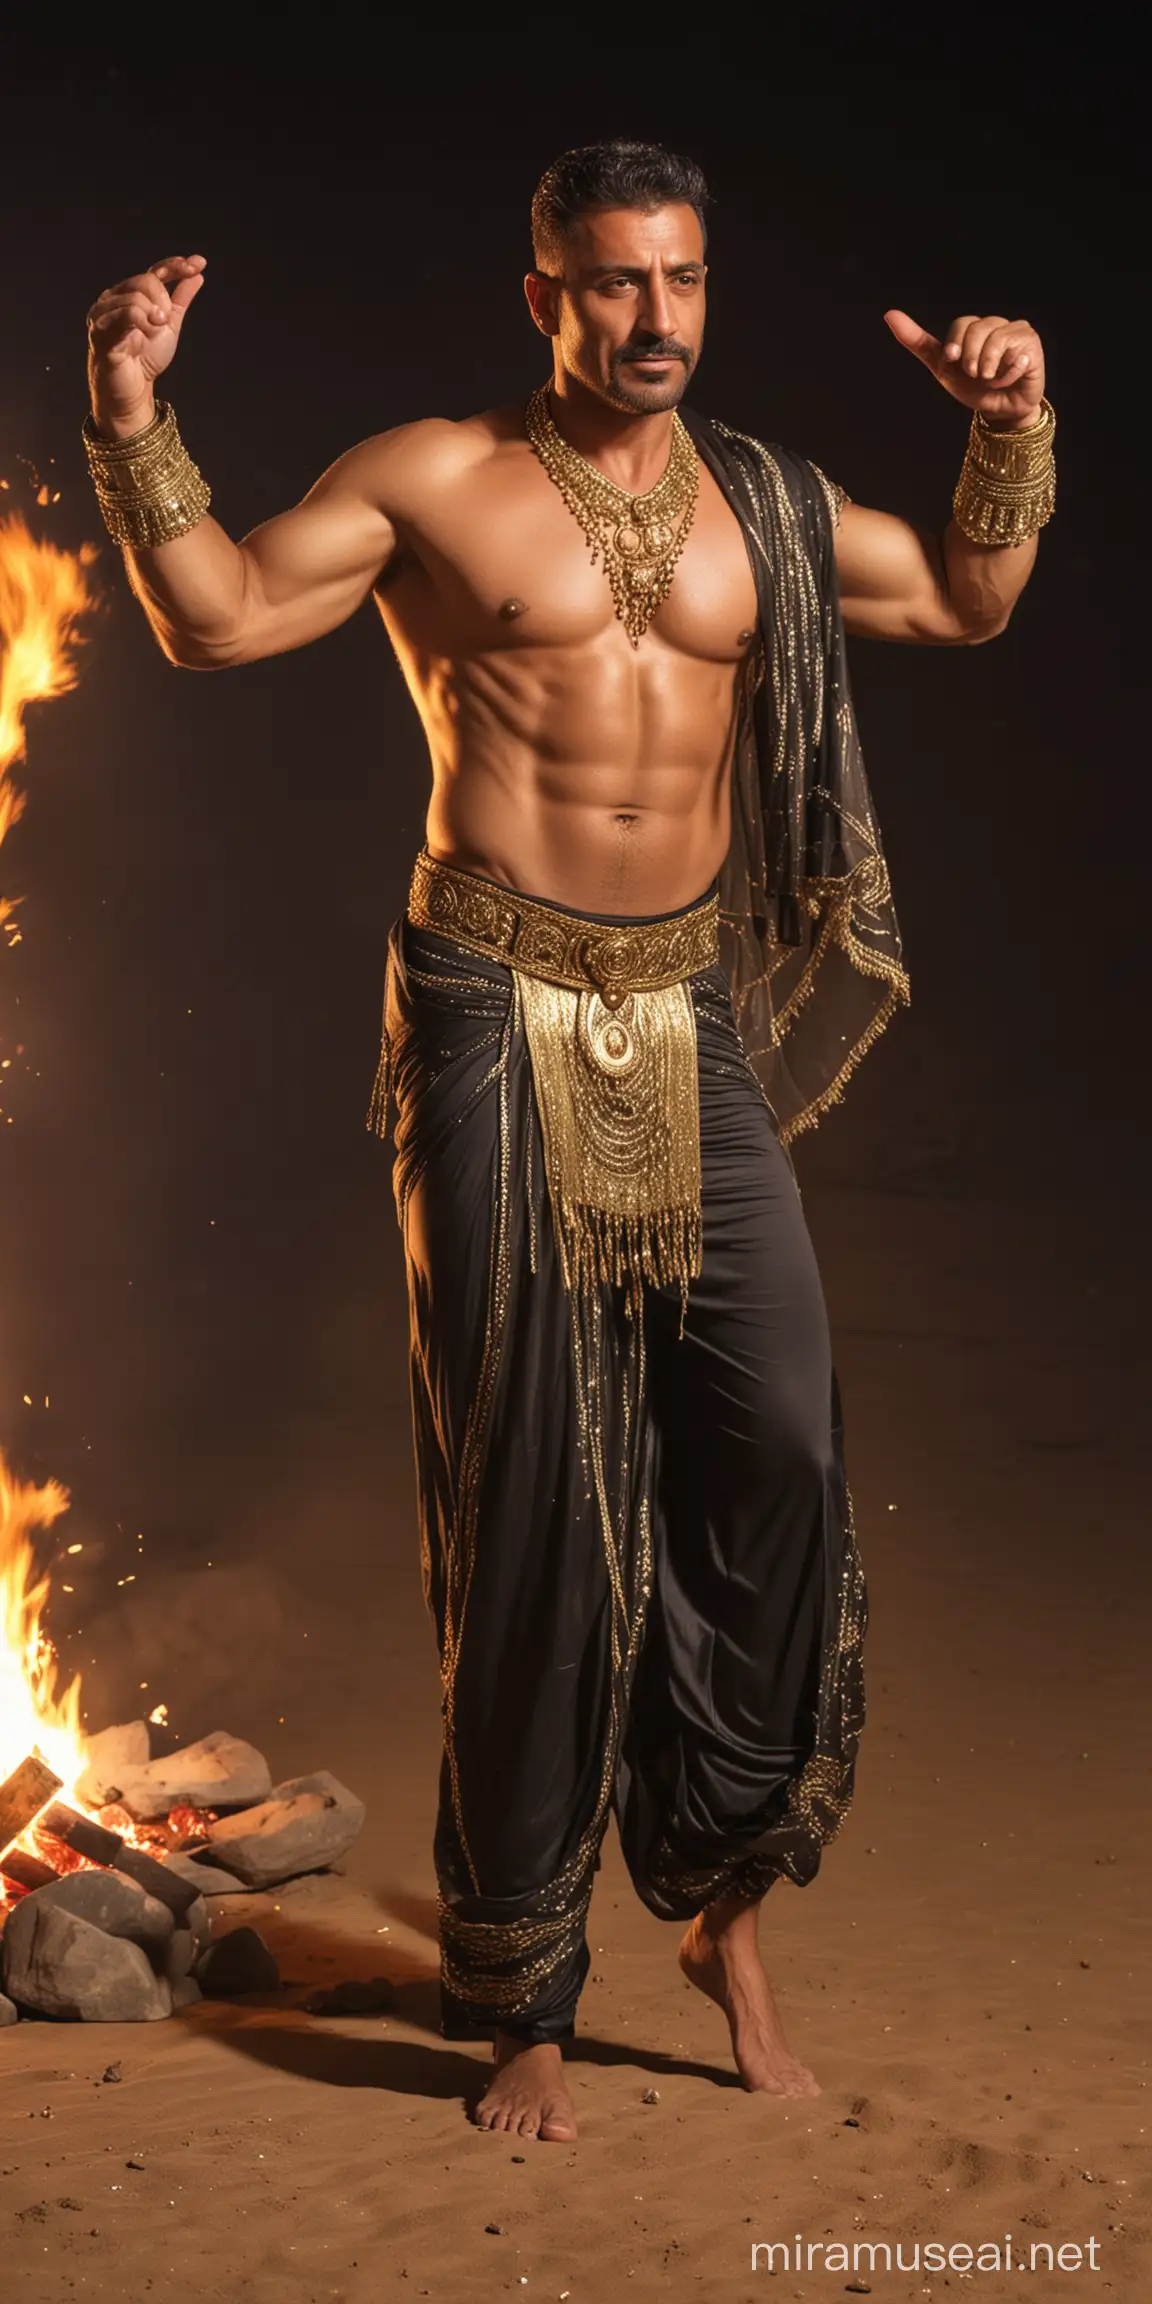 Mature muscular Arabic man as belly dancer, hot, handsome, beautiful, shirtless,oiled up, body glistening, sweaty, wearing skimpy Arabic clothes that belly dancers wear, wearing beautiful gold ornaments, dancing around a bon fire in middle of desert at night